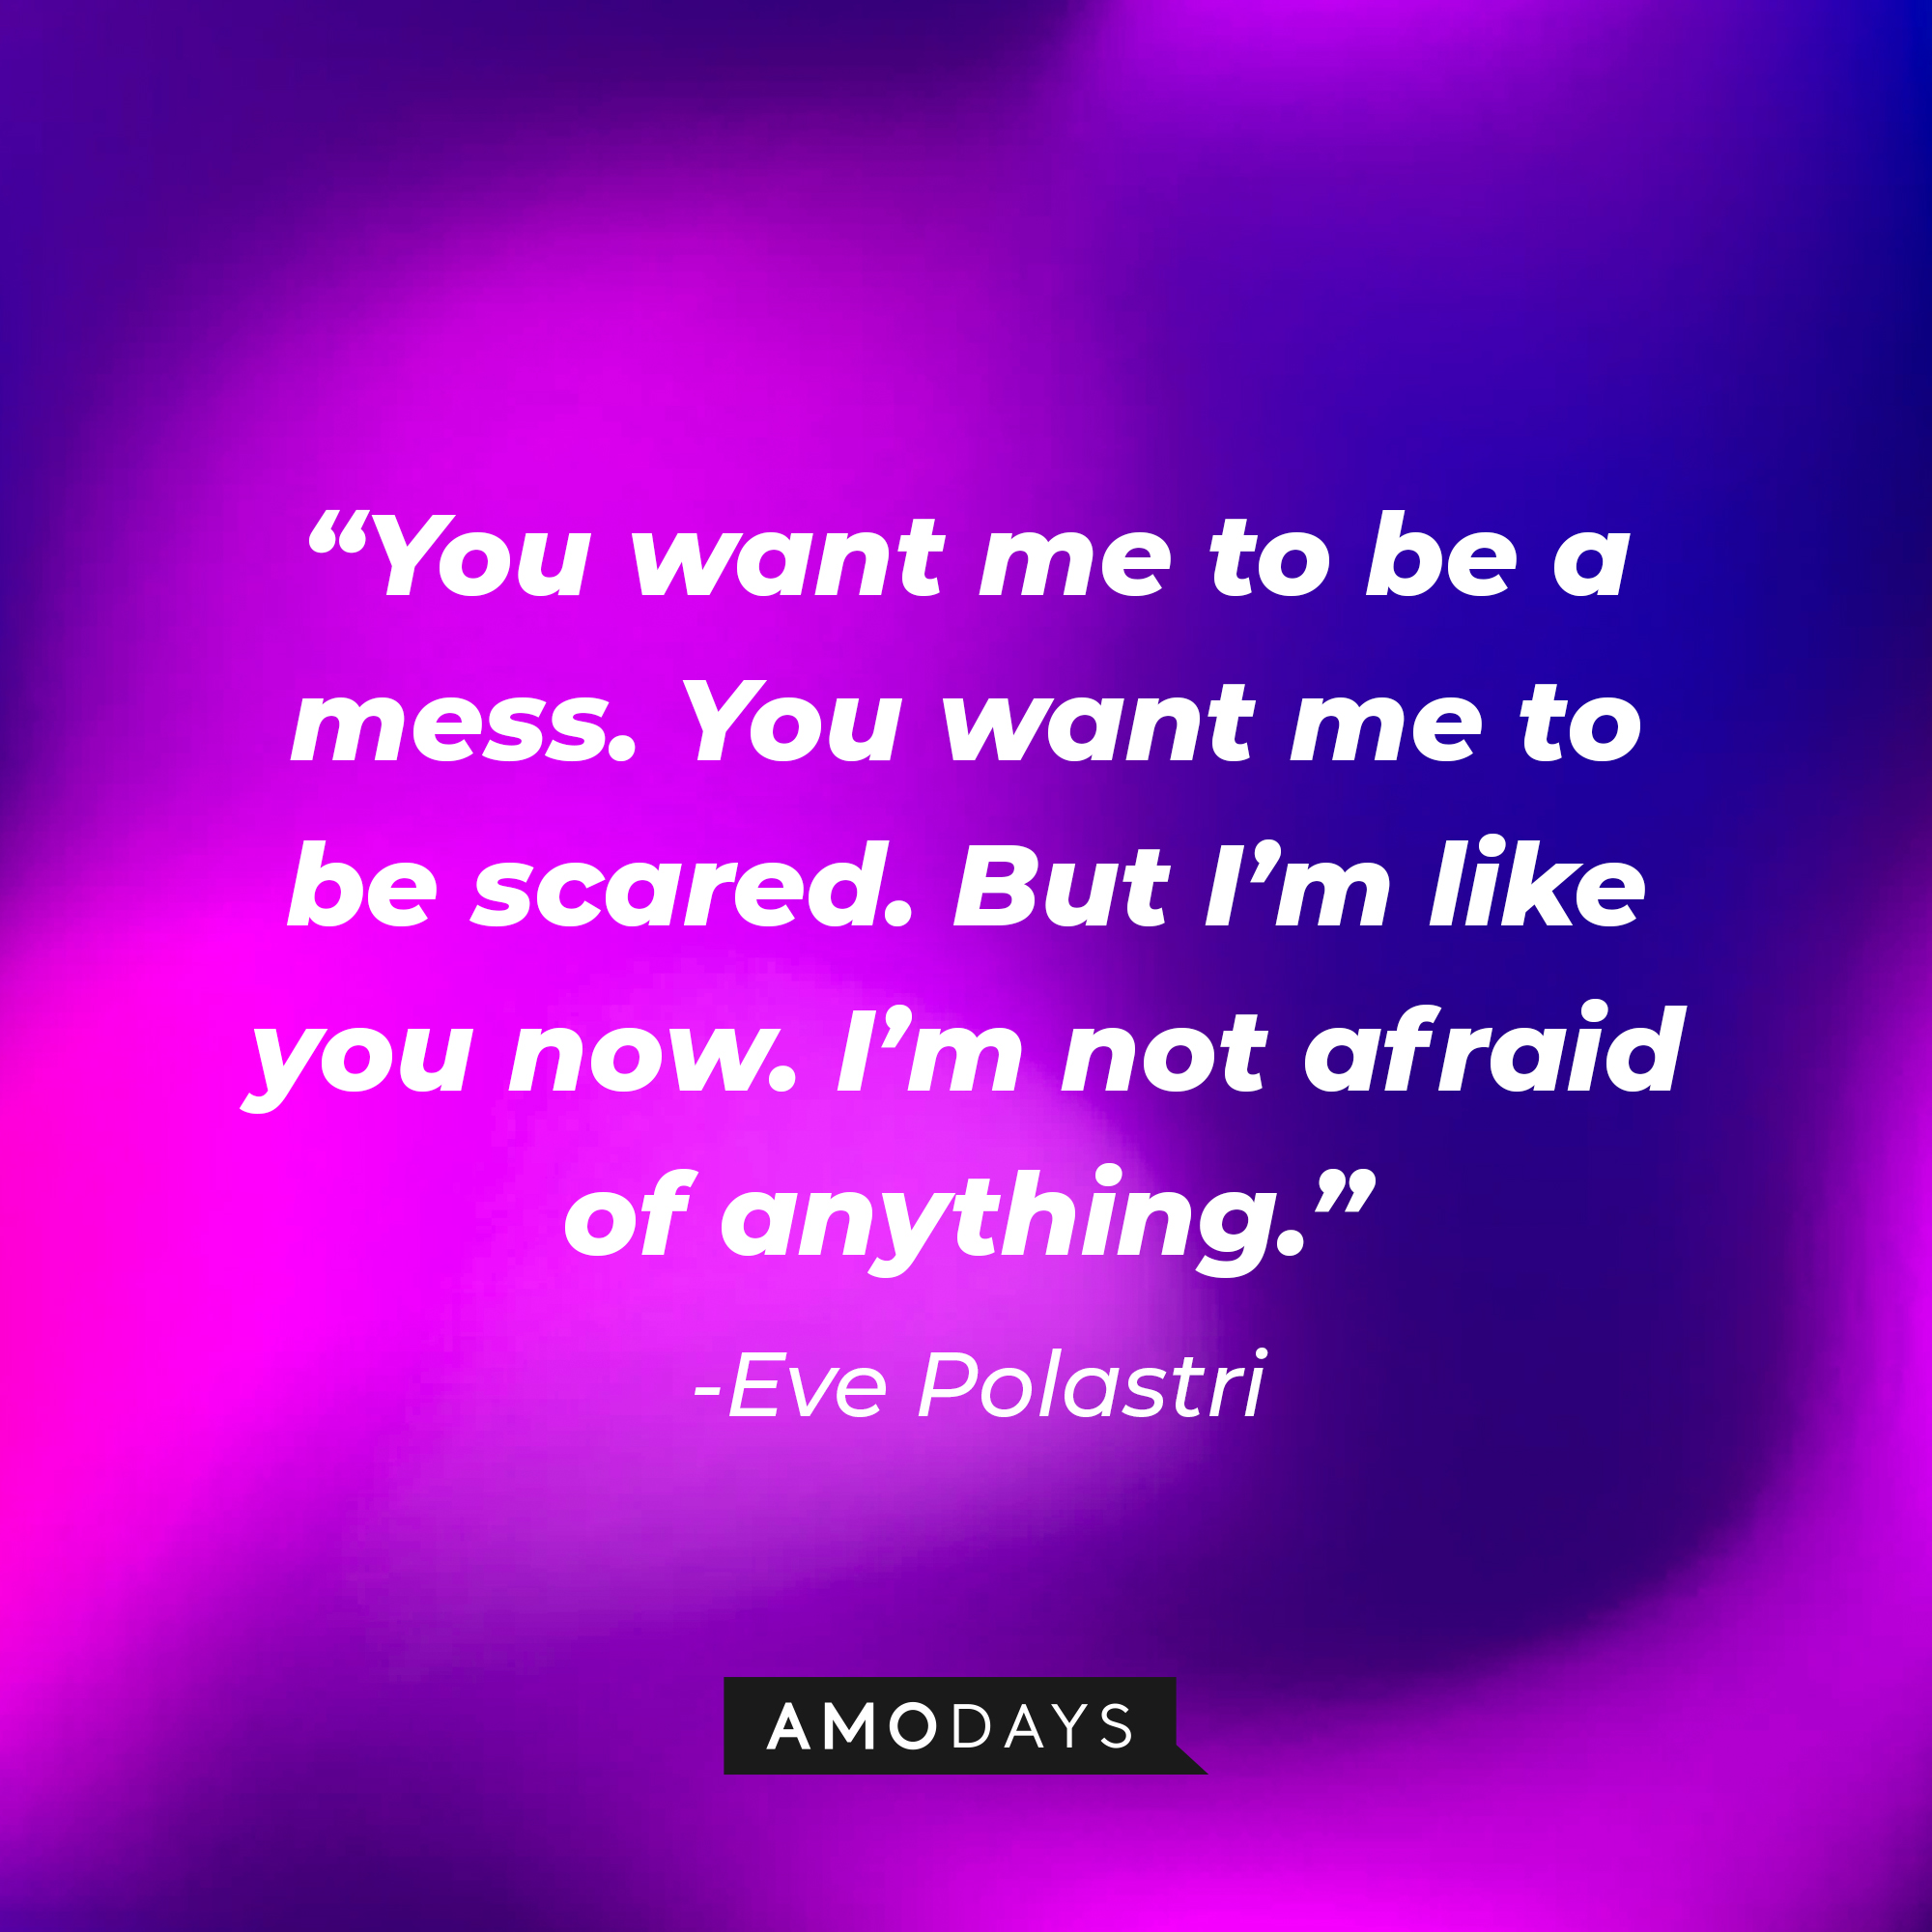 Eve Polastri’s quote: “You want me to be a mess. You want me to be scared. But I’m like you now. I’m not afraid of anything.” | Source: AmoDays